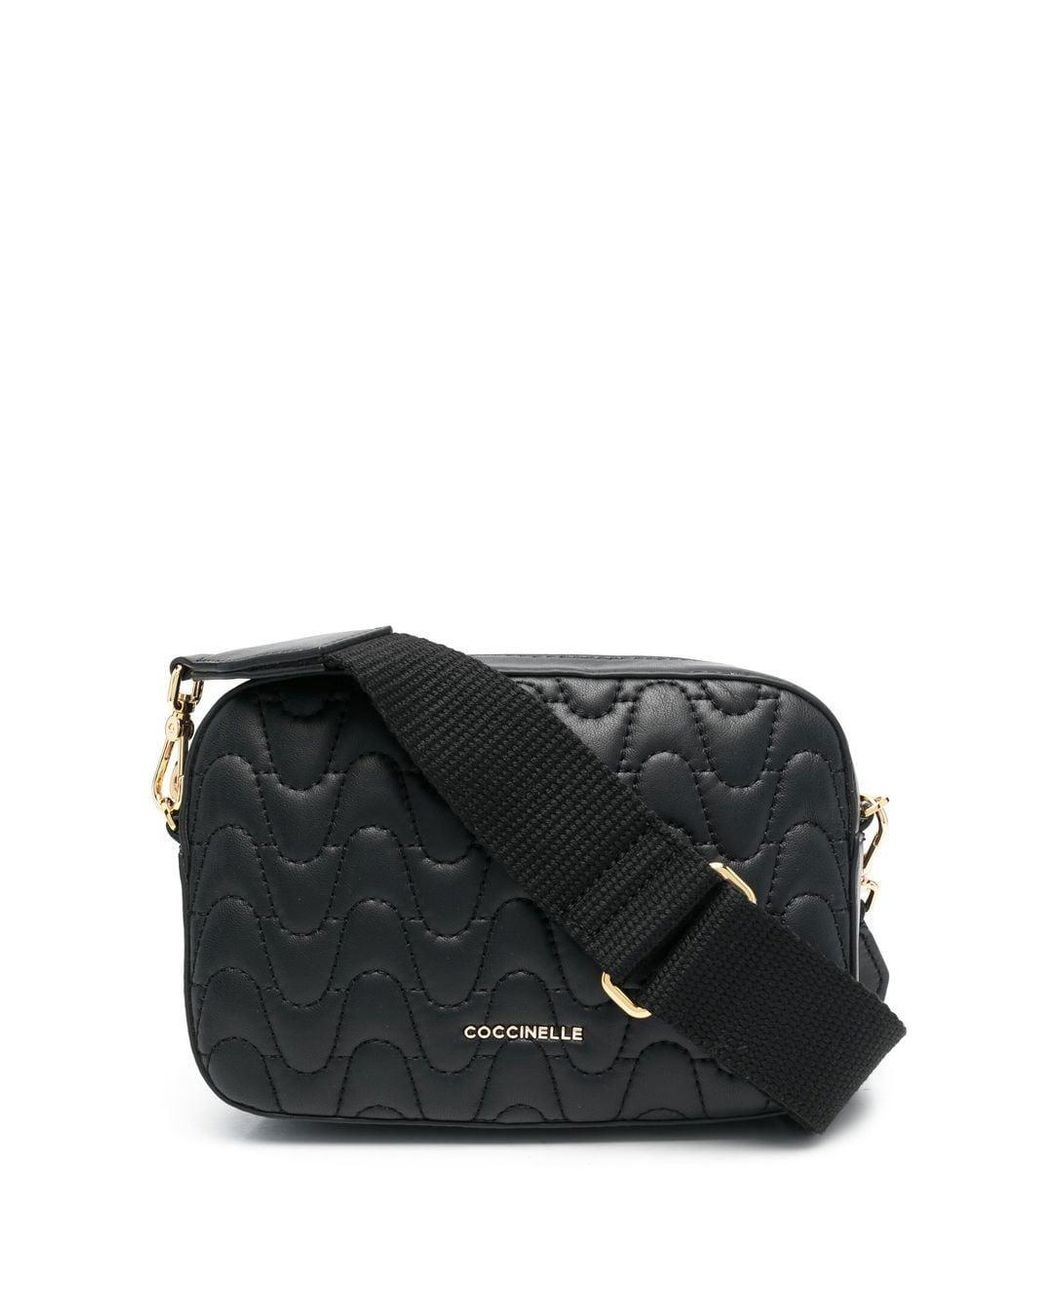 Coccinelle Leather Cross-body Bag in Black | Lyst